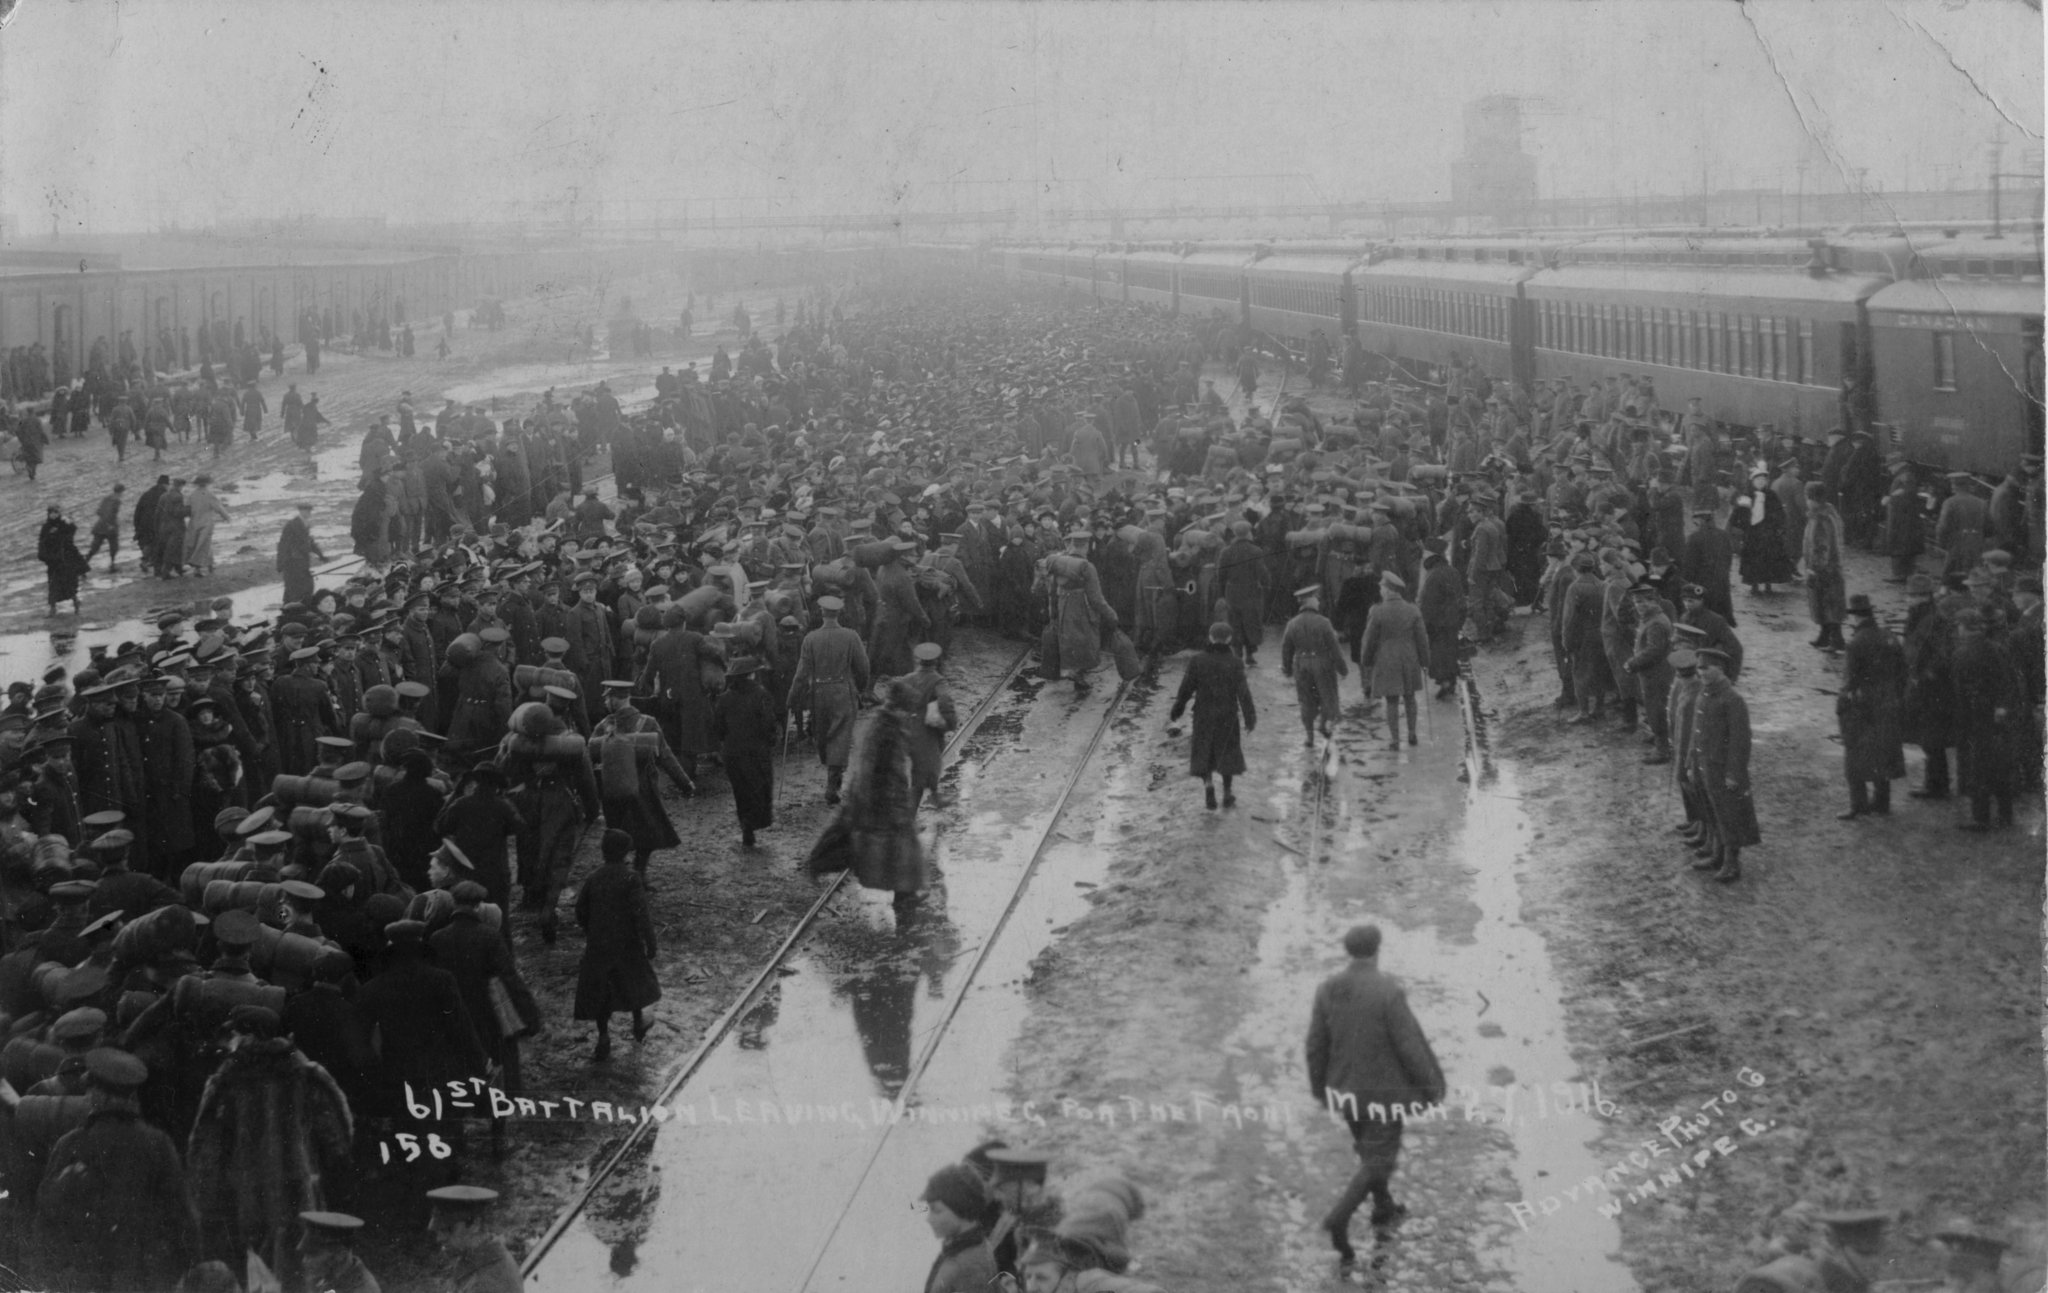 61st Battalion Leaving Winnipeg for the Front, March 27, 1916.